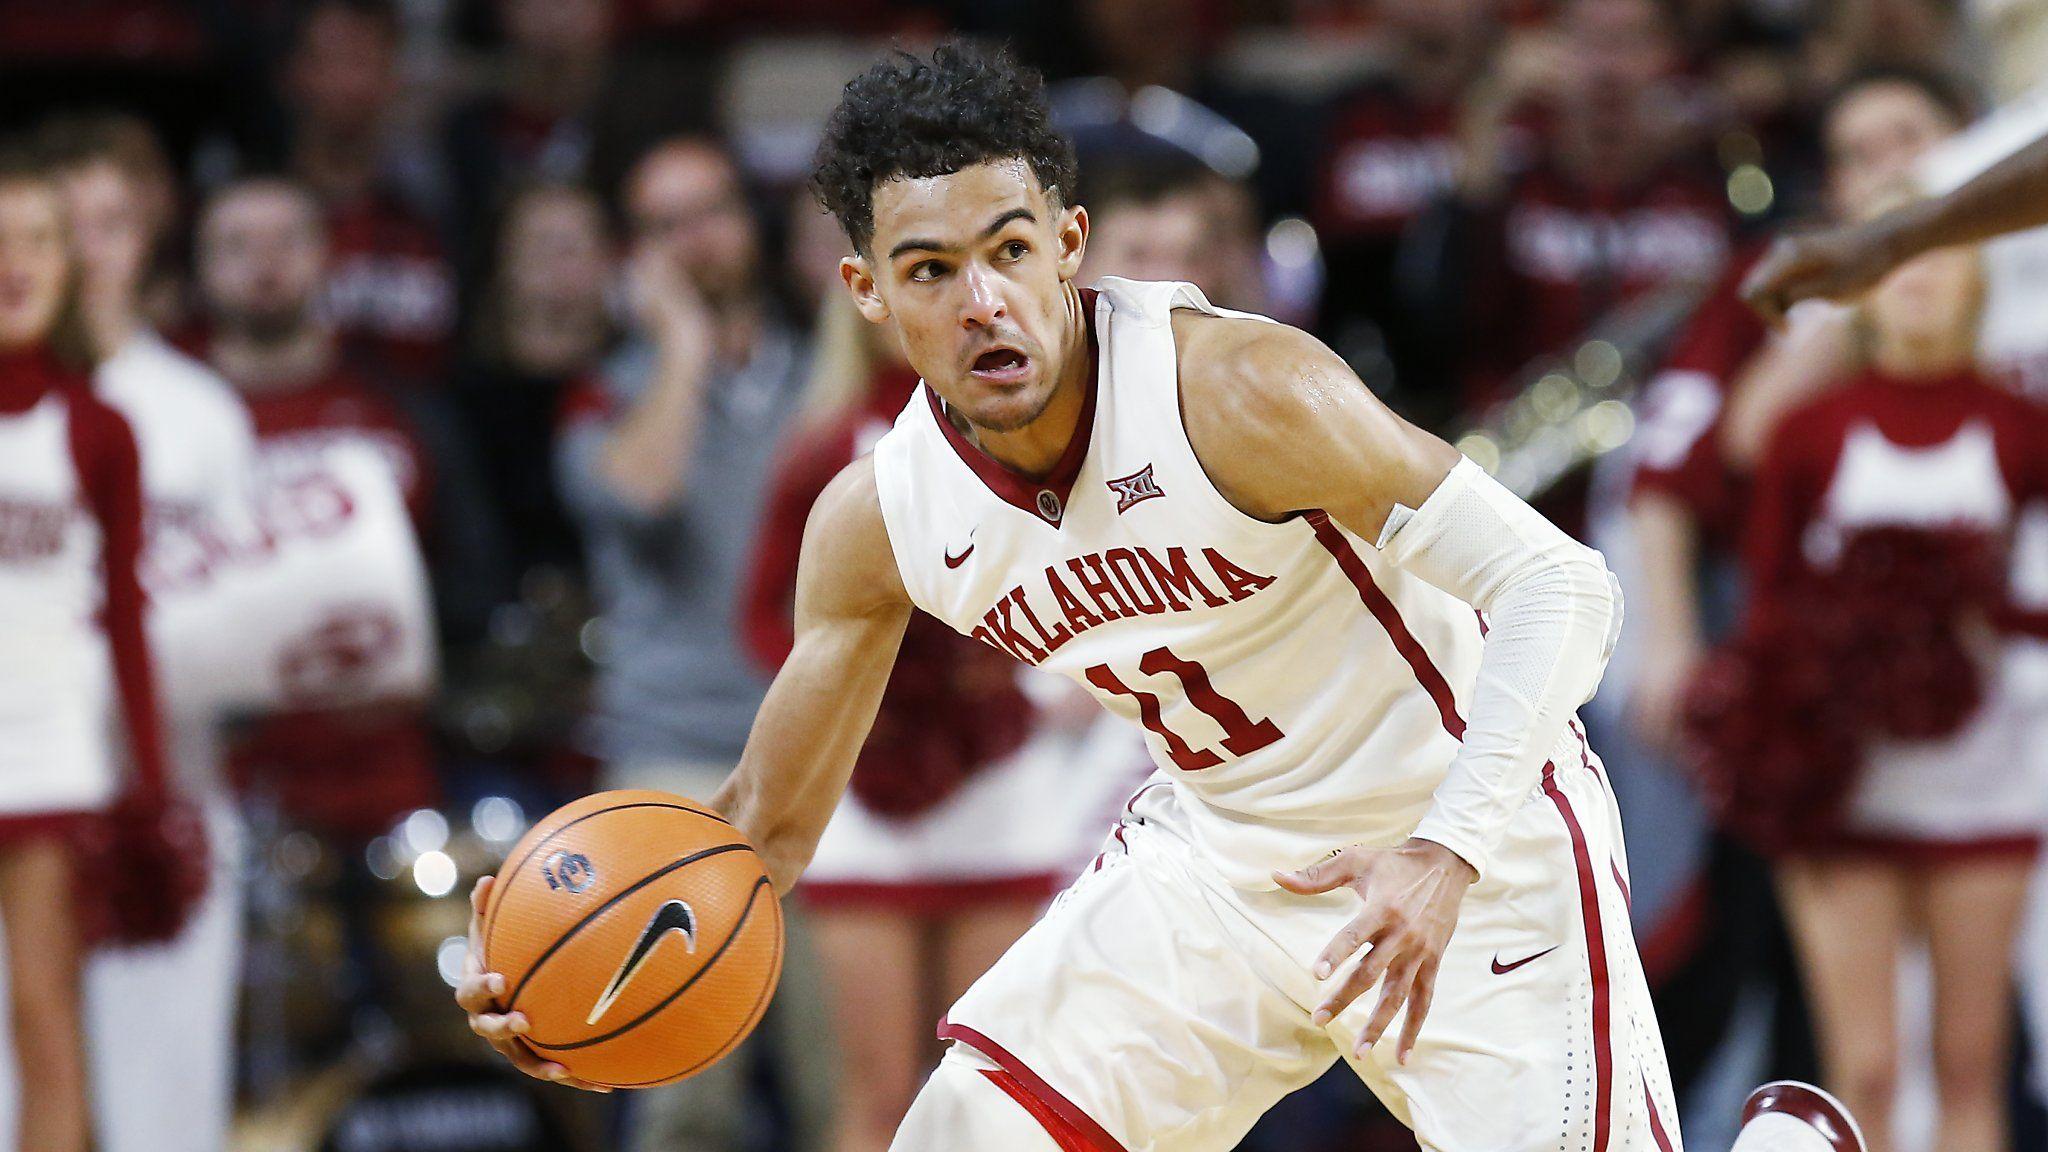 Stephen Curry has high praise for Oklahoma's Trae Young